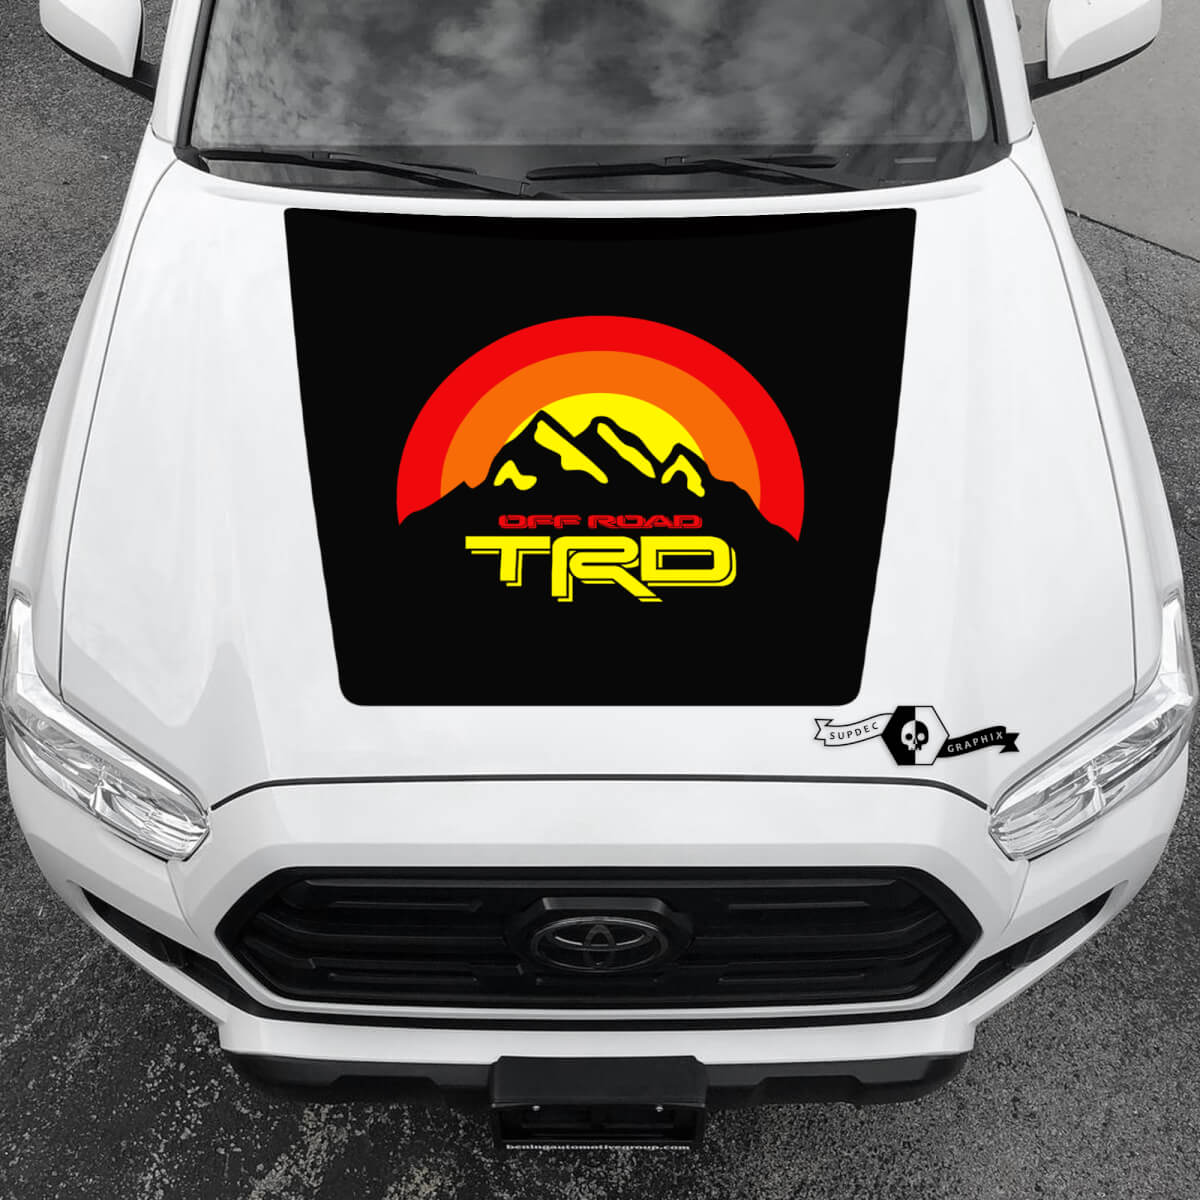 TRD Tacoma Sunrise TOYOTA Off Road Mountains Peak Summit Hood Decals Stickers for Tacoma Tundra 4Runner Hilux